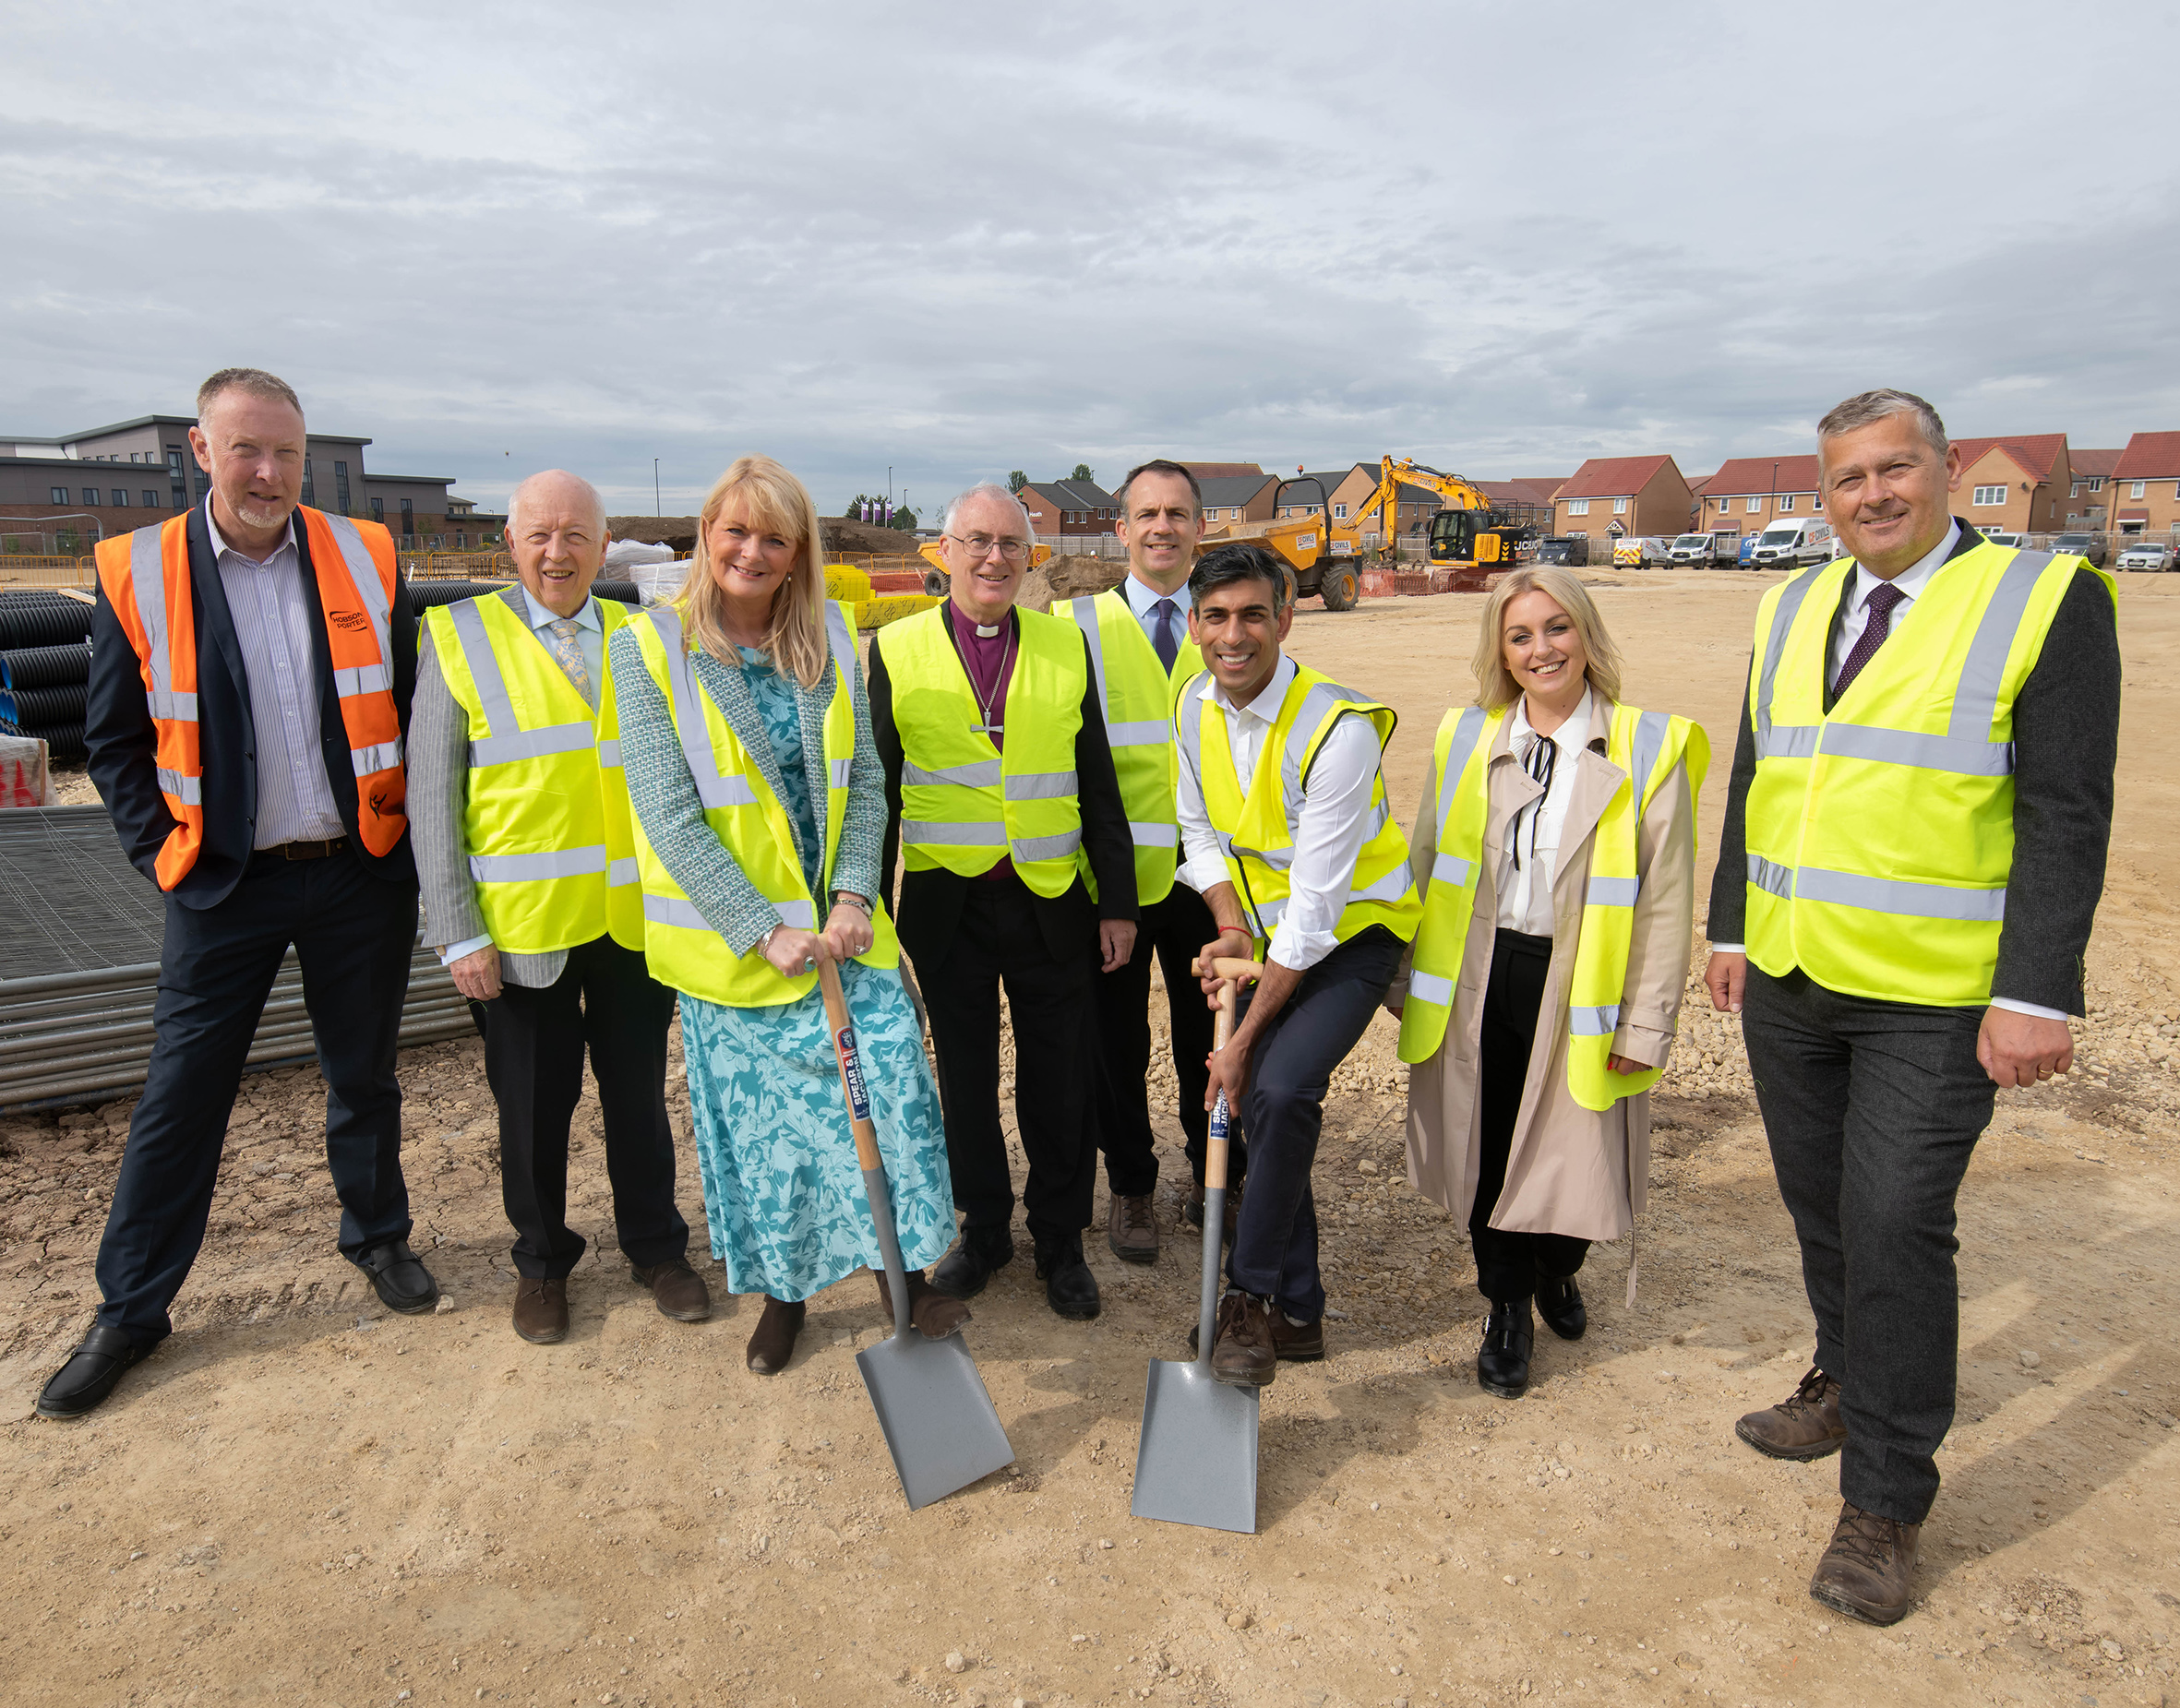 Prime Minister Rishi Sunak, who is the MP for Richmond in North Yorkshire, joined the milestone occasion which signalled the start of construction of a new primary school in Northallerton.